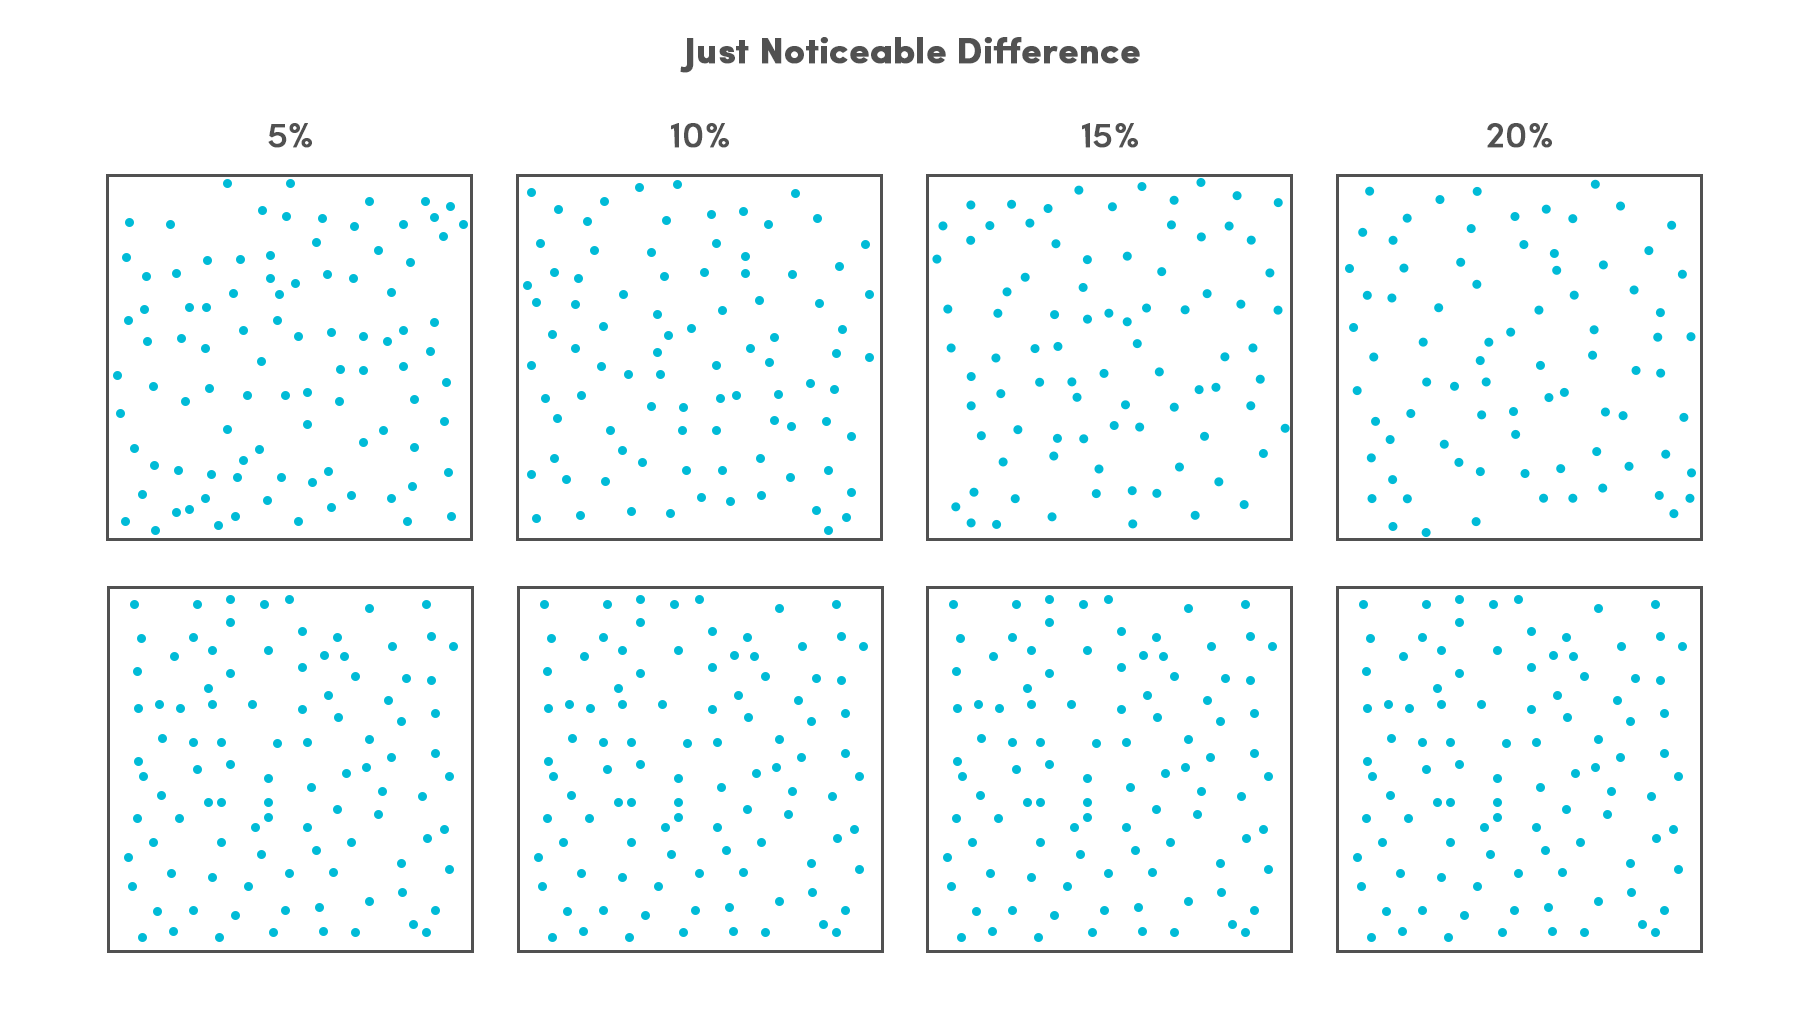 Web performance and psychology: visual example of Just Noticeable Difference